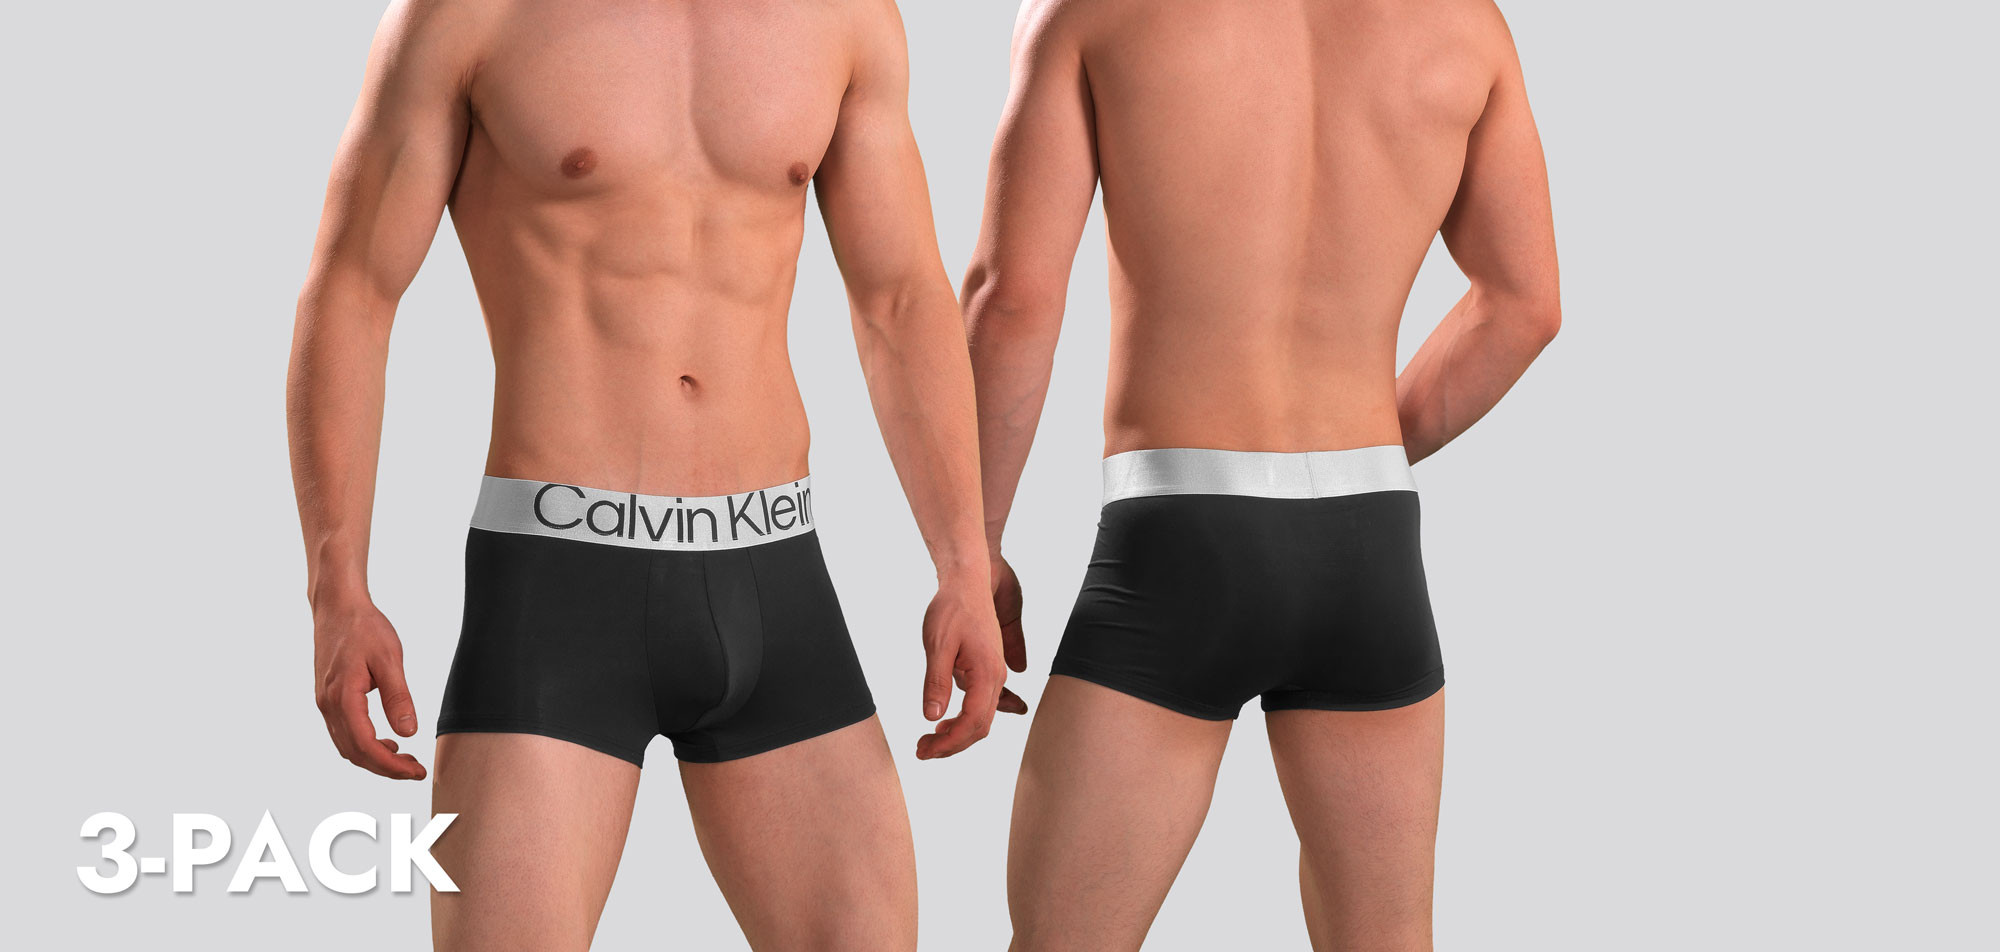 Calvin Klein Low Rise Trunk 3-pack NB3074A Microfiber Reconsidered Steel,